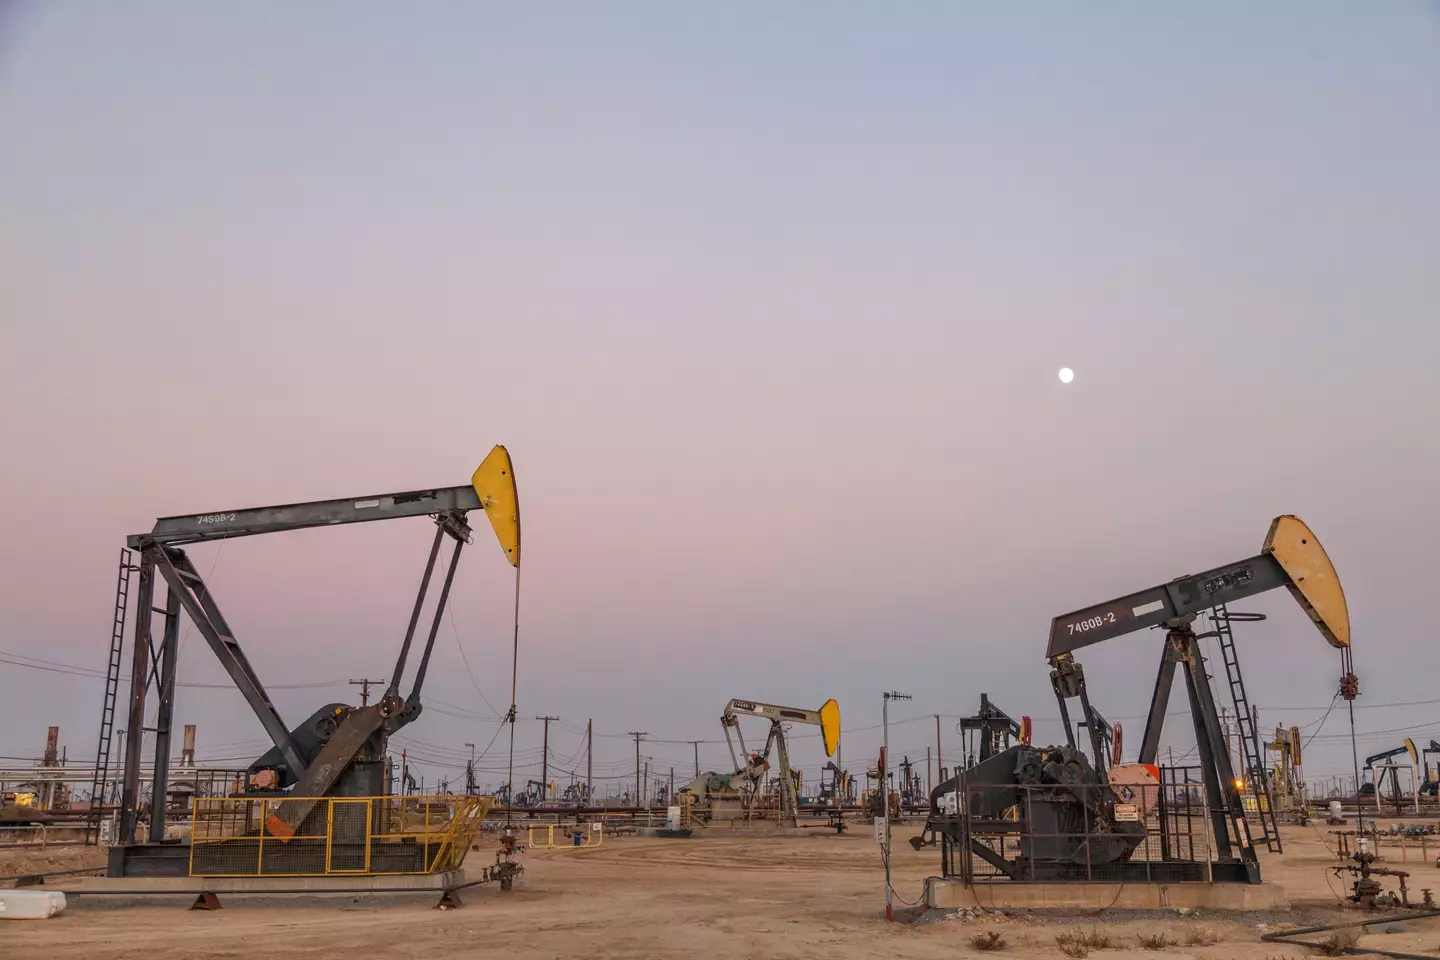 Pumpjacks at an oil field and hydraulic fracking site.